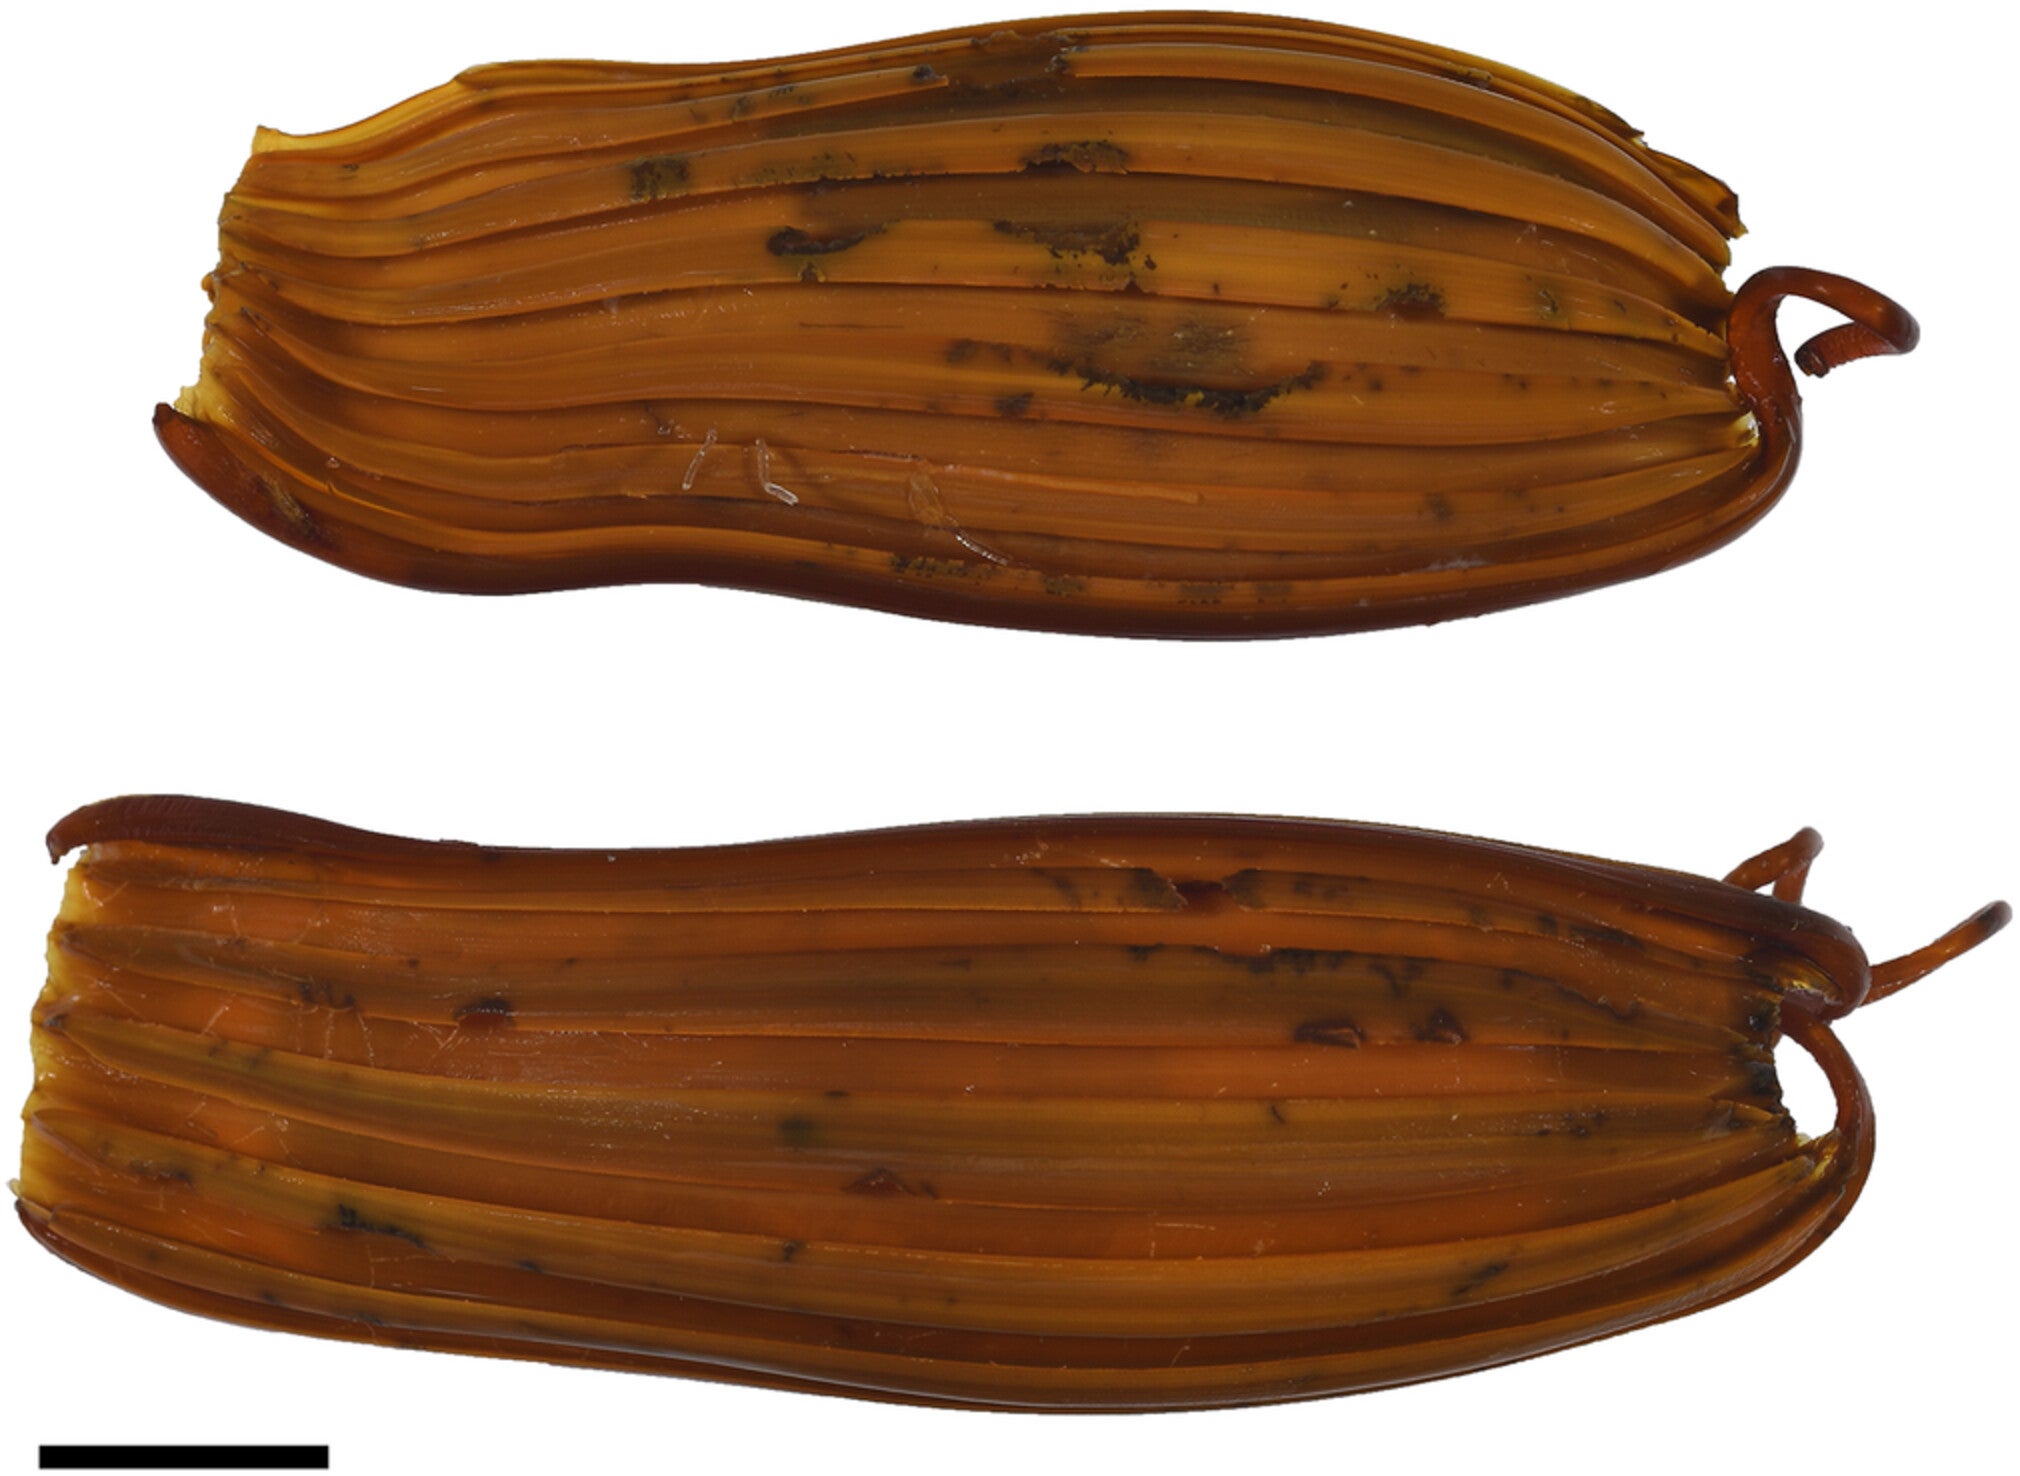 The ridged egg cases that were matched to Apristurus ovicorrugatus. The black scale bar represents 0.4 inches (10 mm) (Image: White et al. (2023), Journal of Fish Biology, CC BY-NC-ND 4.0)